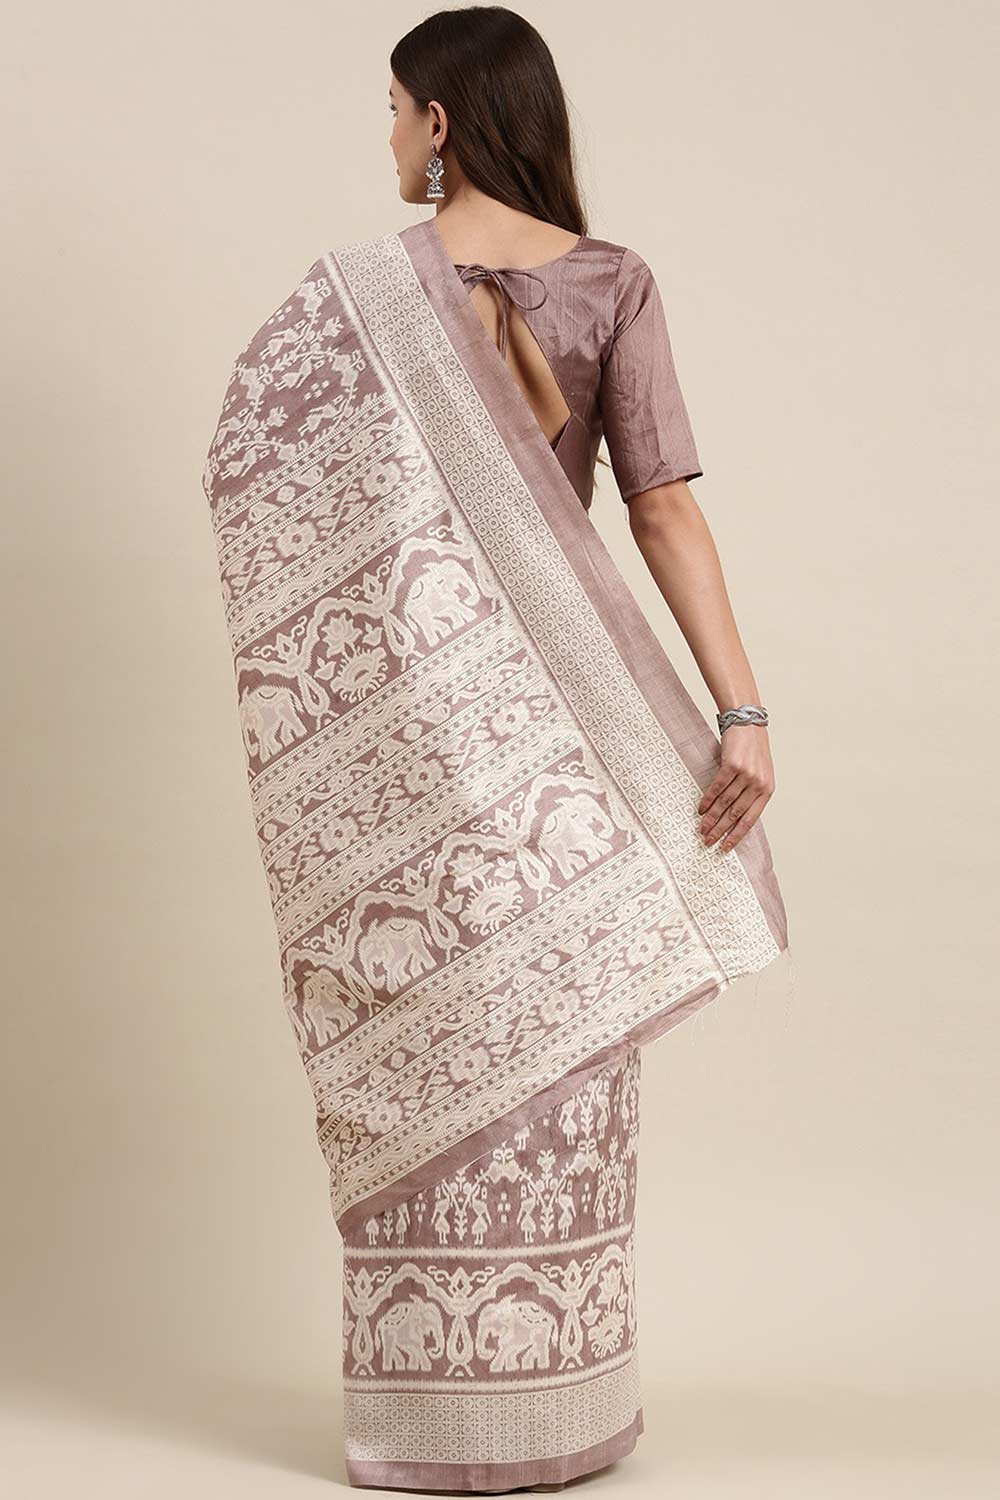 Shop Bibi Bhagalpuri Silk Mauve Printed One Minute Saree at best offer at our  Store - One Minute Saree